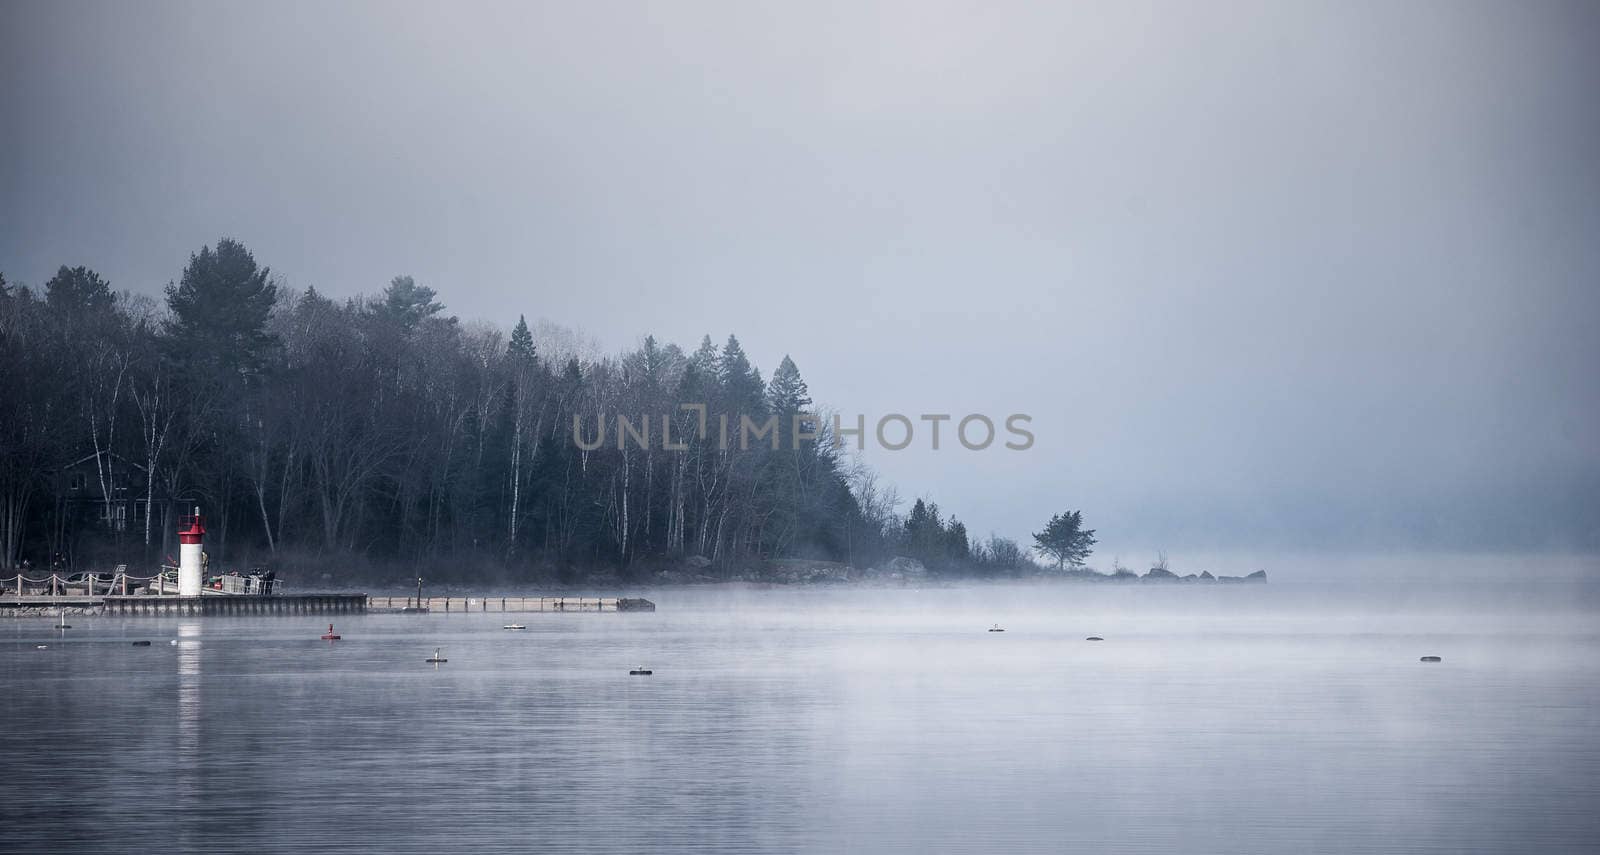 Heavy blanket of fog lifting off the Ottawa River revealing a small peninsular forest and lighthouse, Ontario Canada.